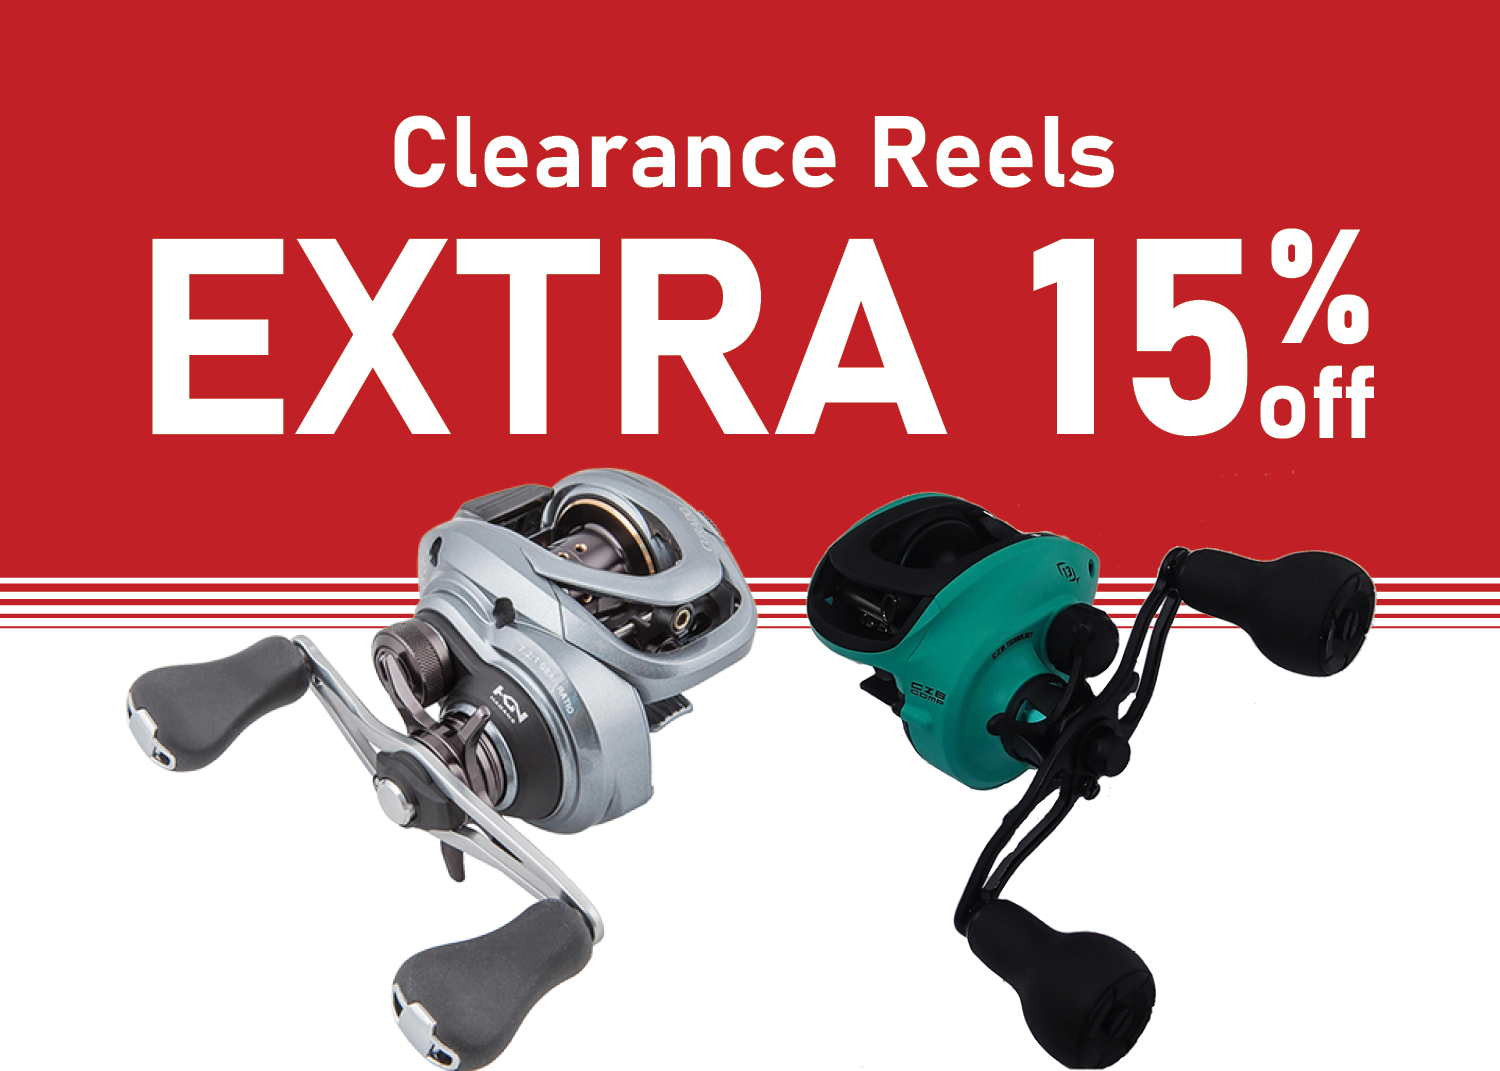 Save an EXTRA 15% on Clearance Reels